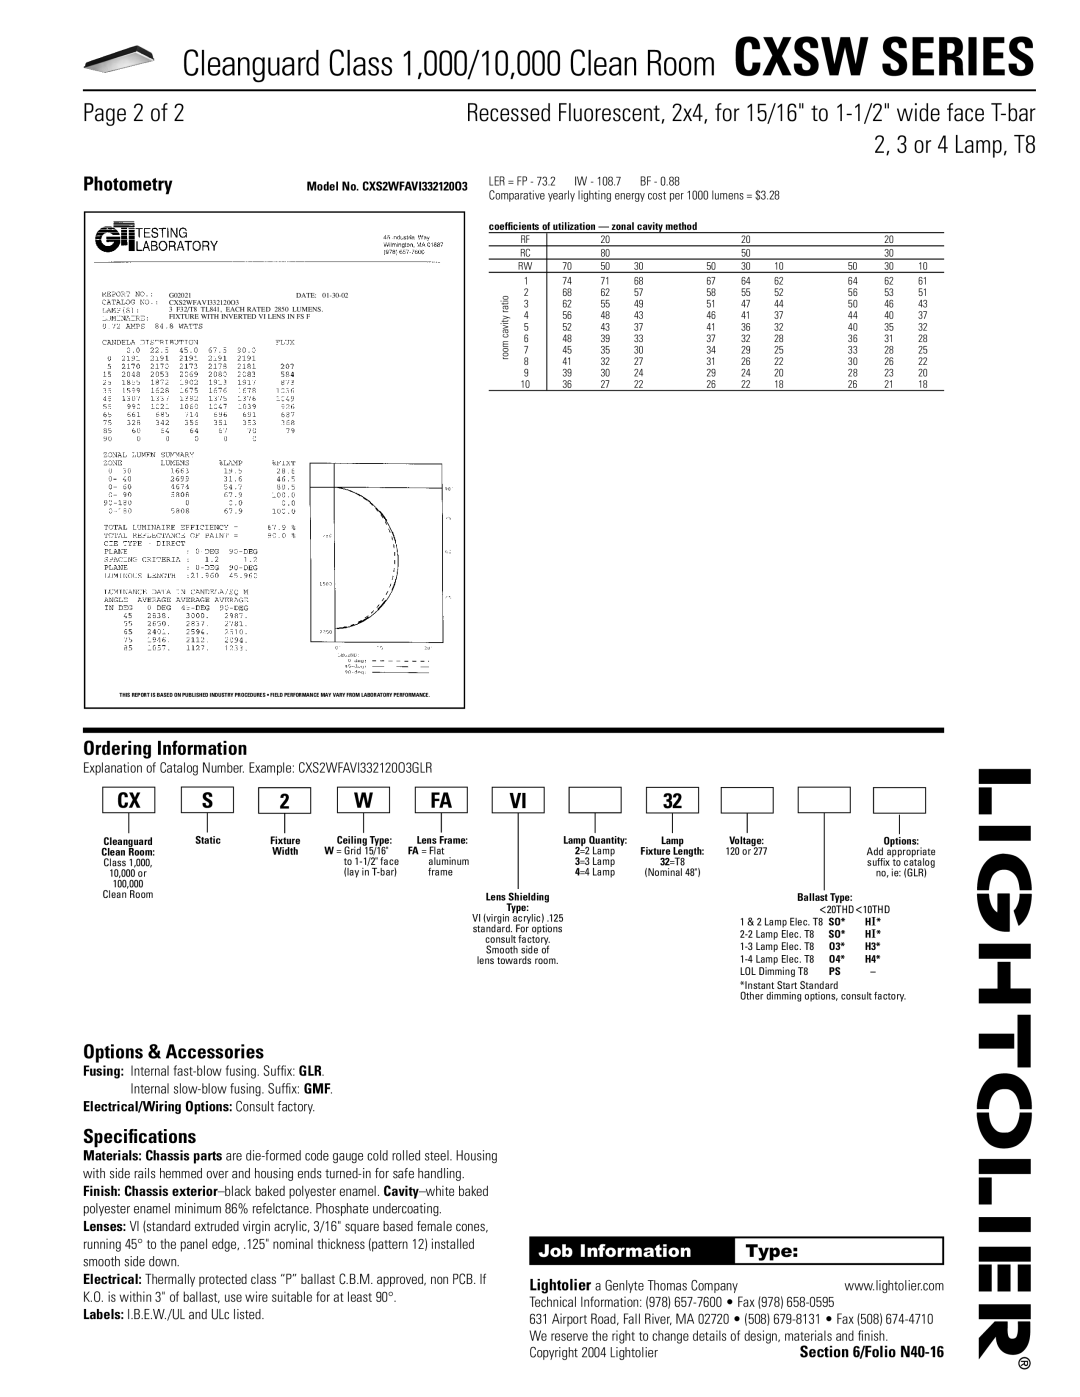 Lightolier CXSW SERIES Page 2 of, Photometry, Ordering Information, Options & Accessories, Speciﬁcations, Job Information 